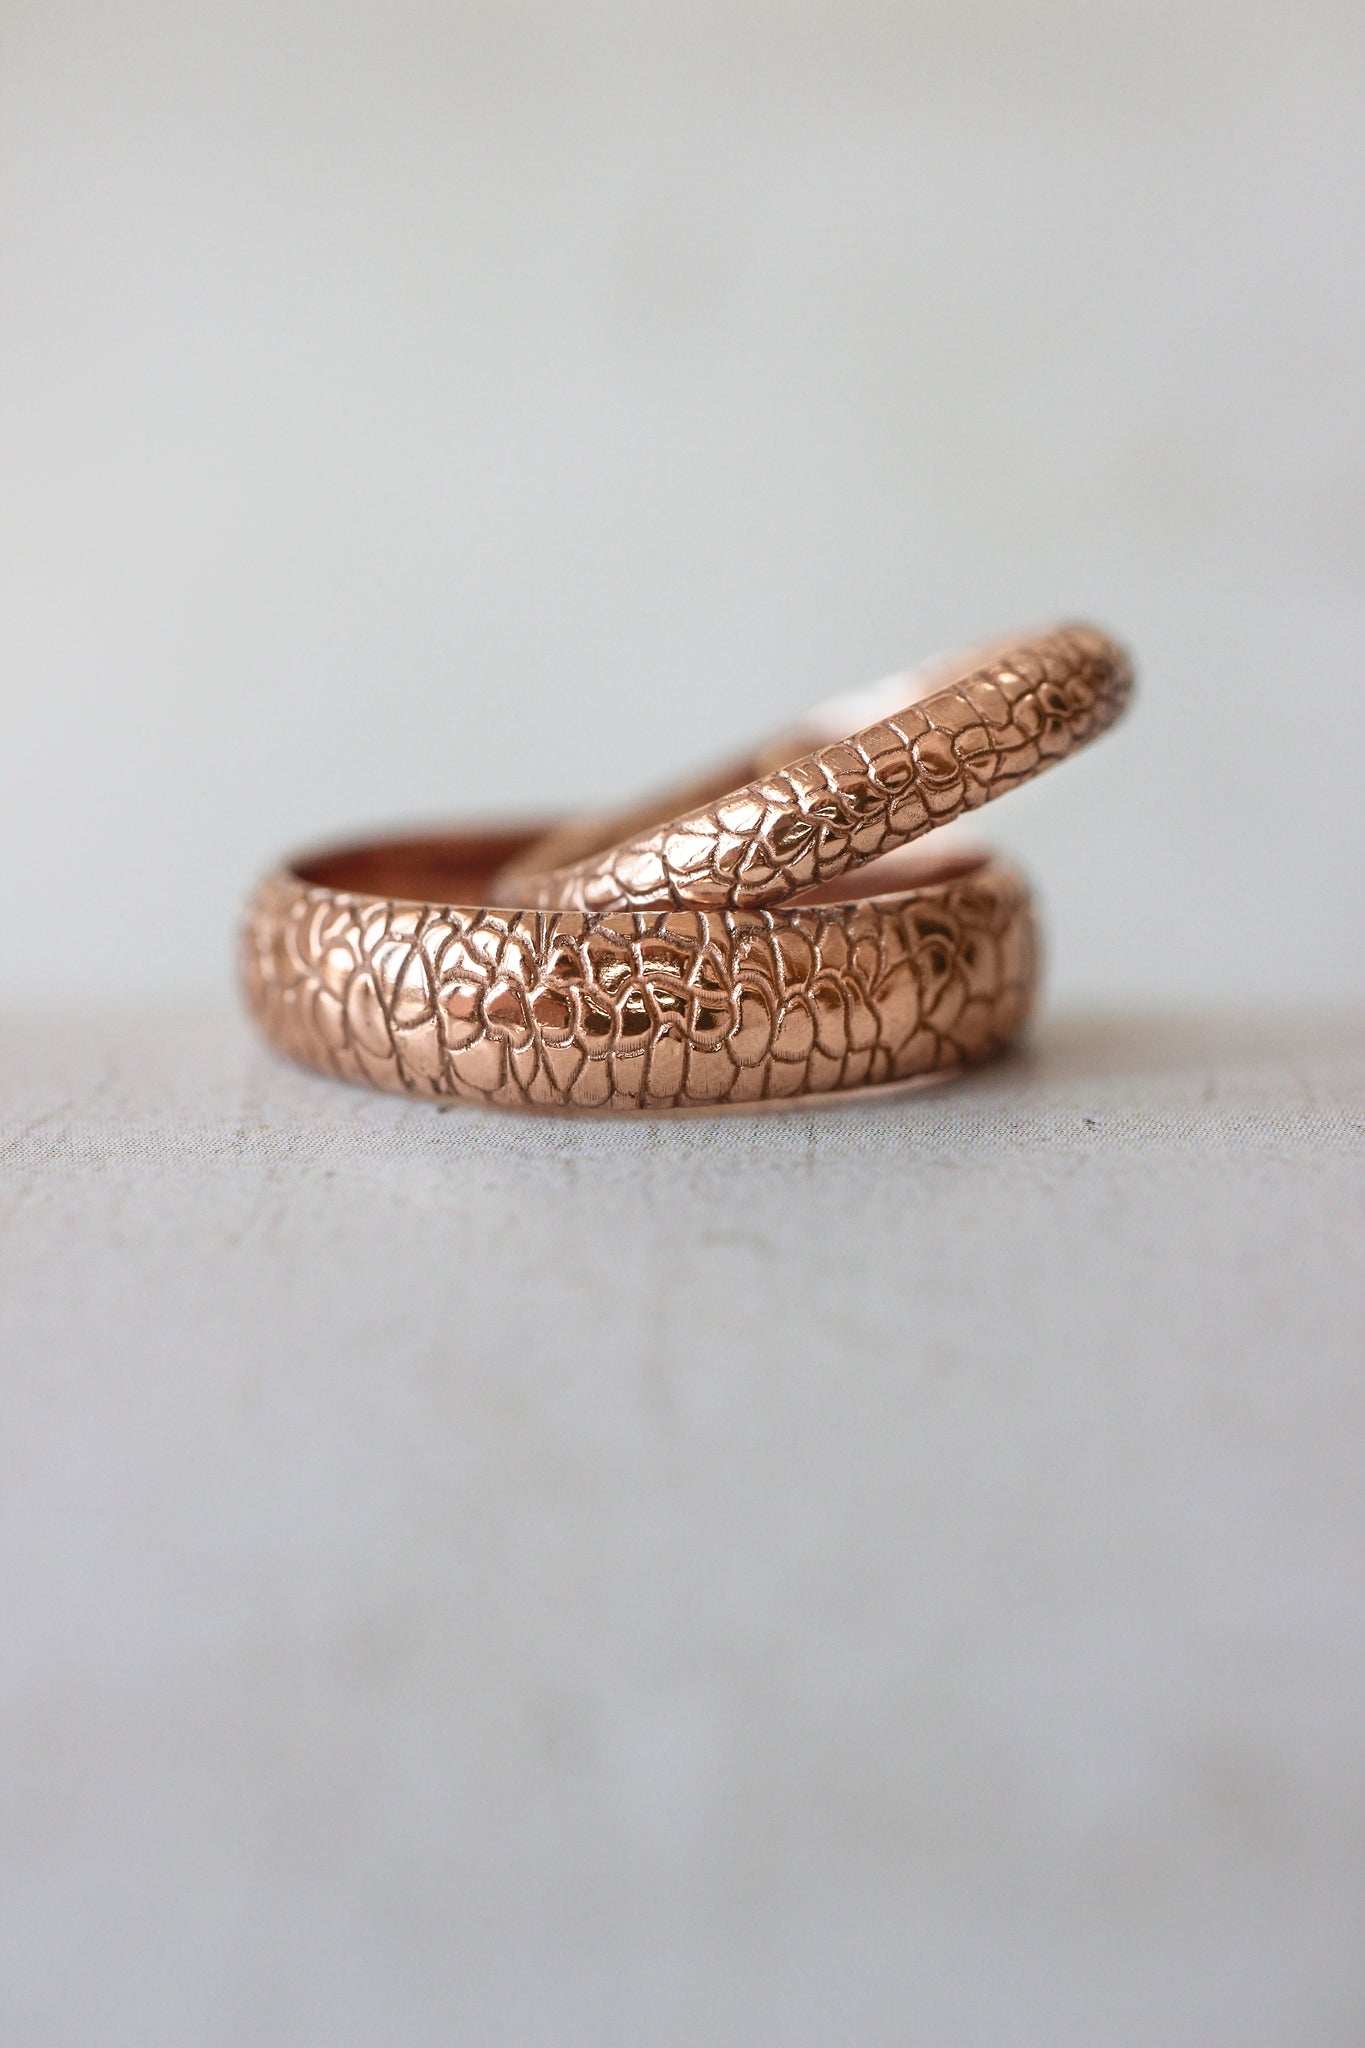 Reptile skin ring, 5 mm wedding band for man - Eden Garden Jewelry™